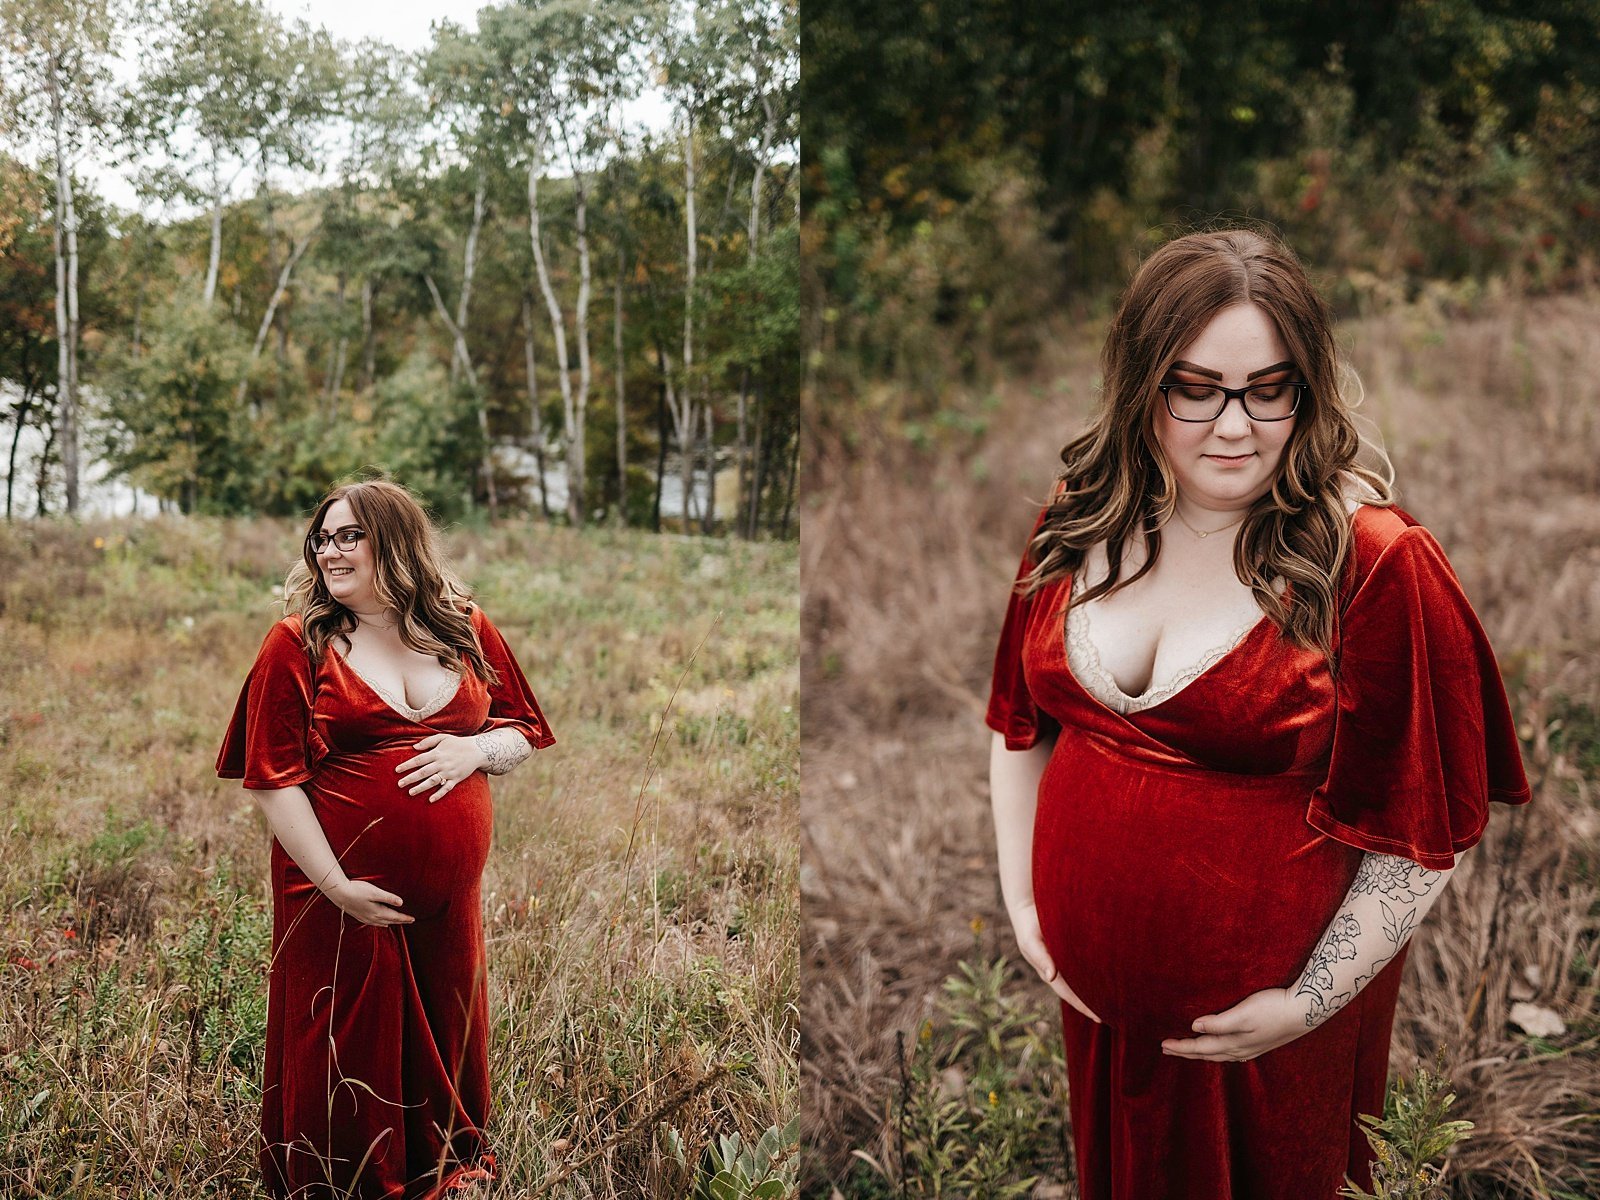  Pregnant woman in red dress for a shoot in Lebanon Hills Park in Minneapolis. 